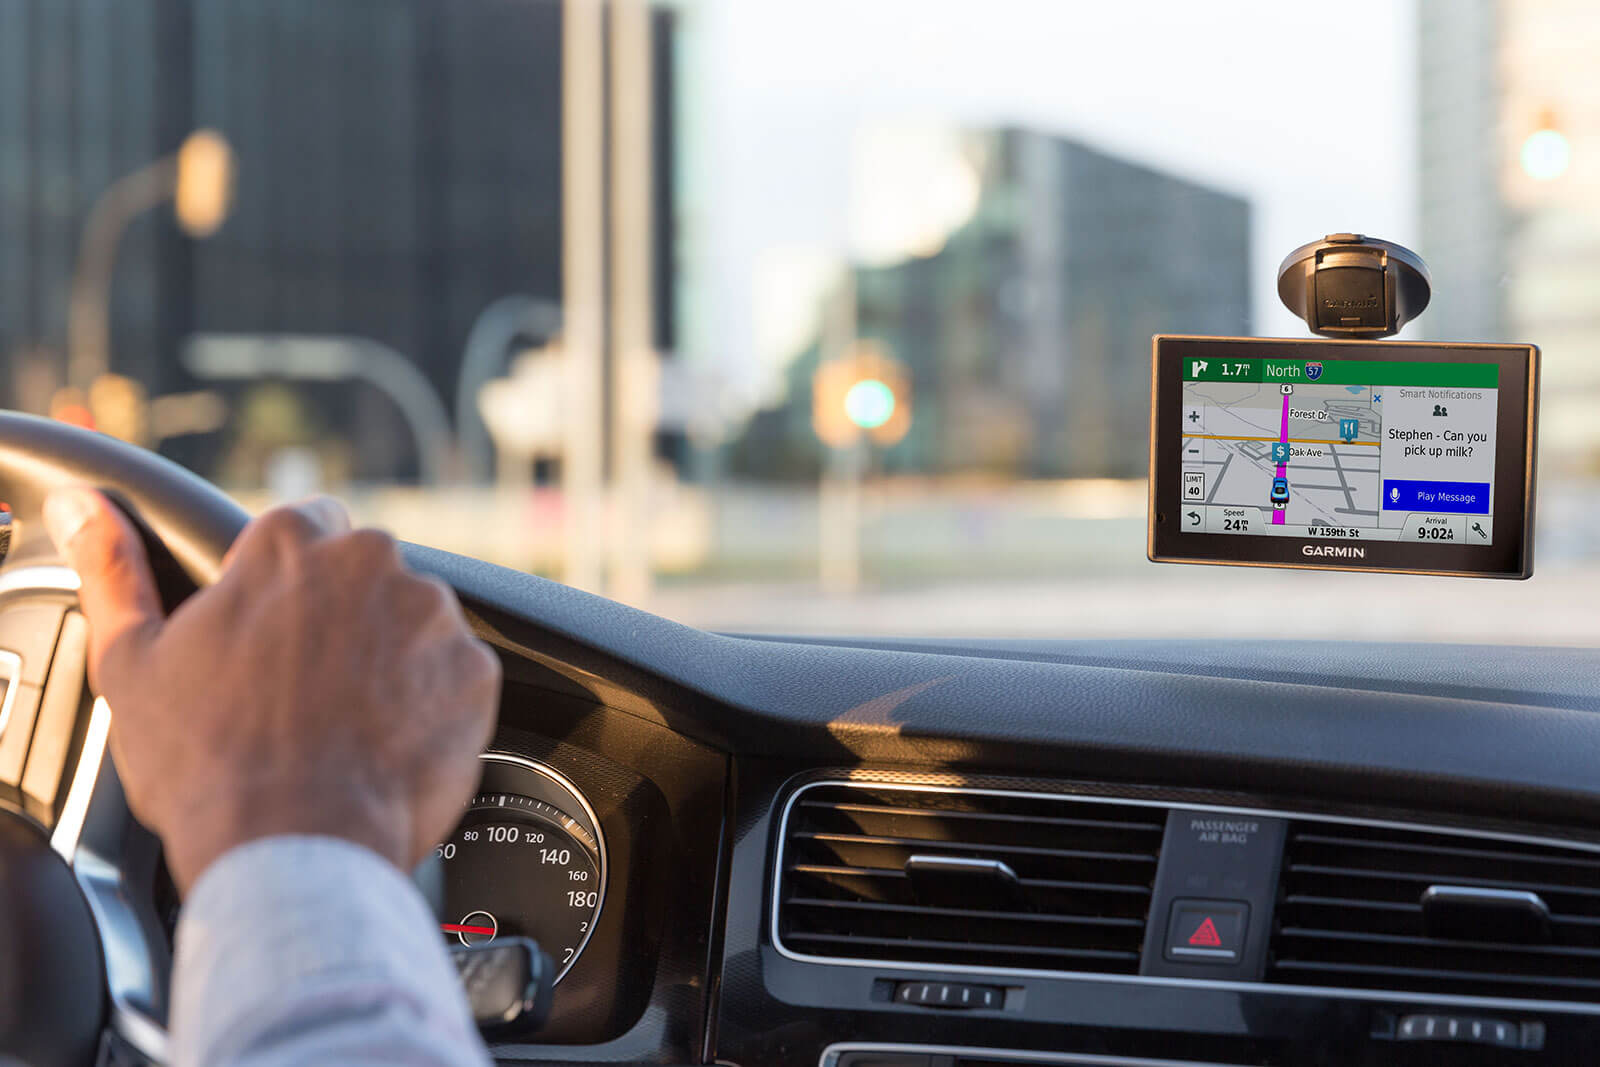 The 10 Best Car GPS Navigation Systems 2019 - Auto Quarterly